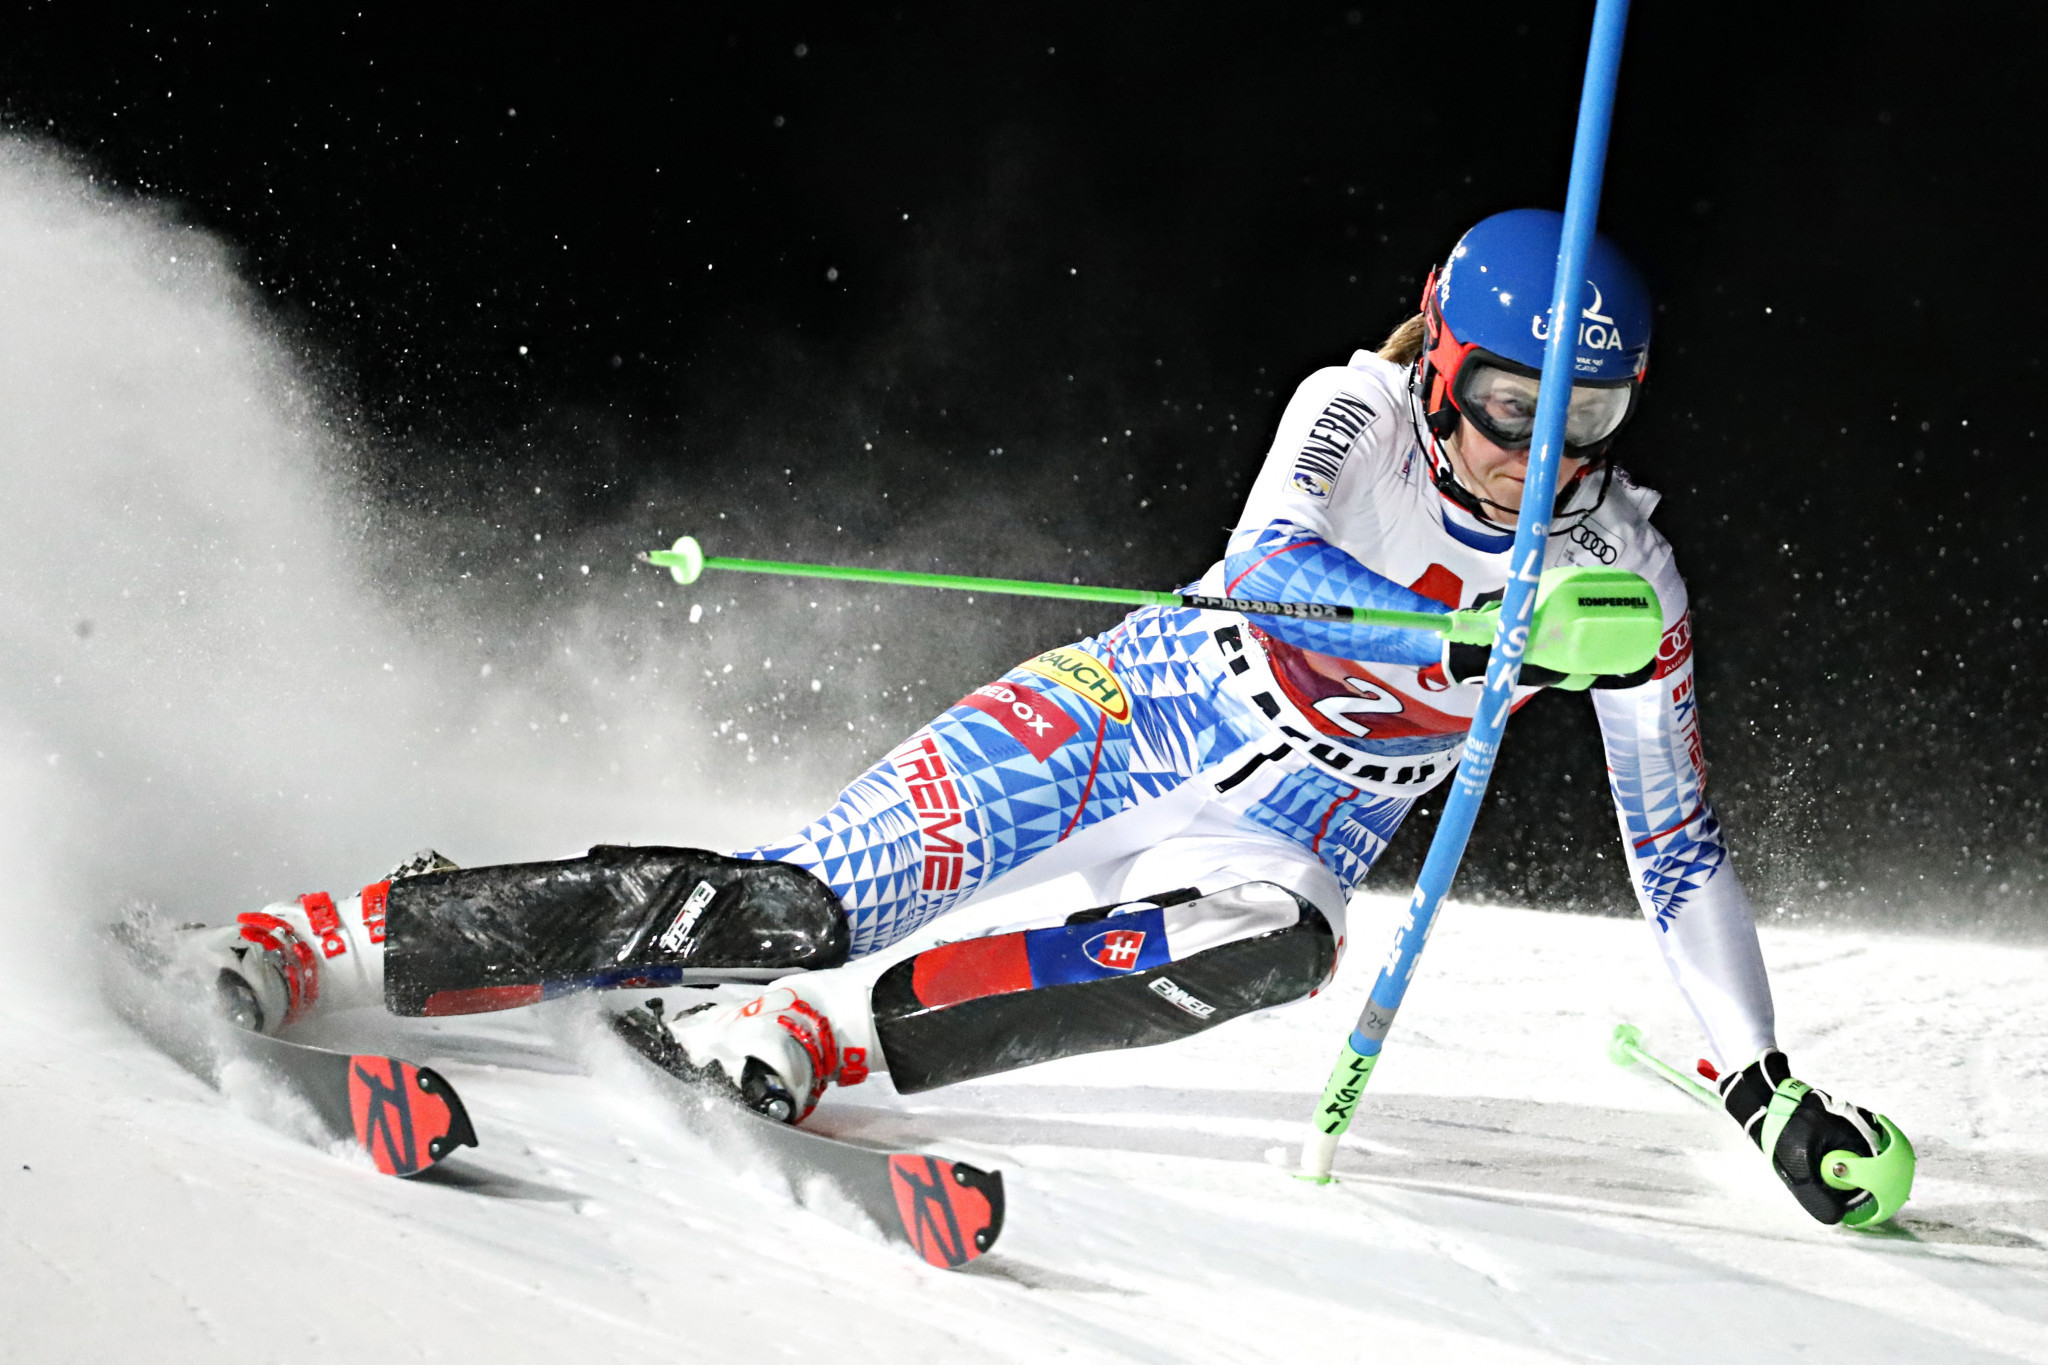 Vlhová wins second consecutive FIS Alpine Skiing World Cup slalom event in Flachau